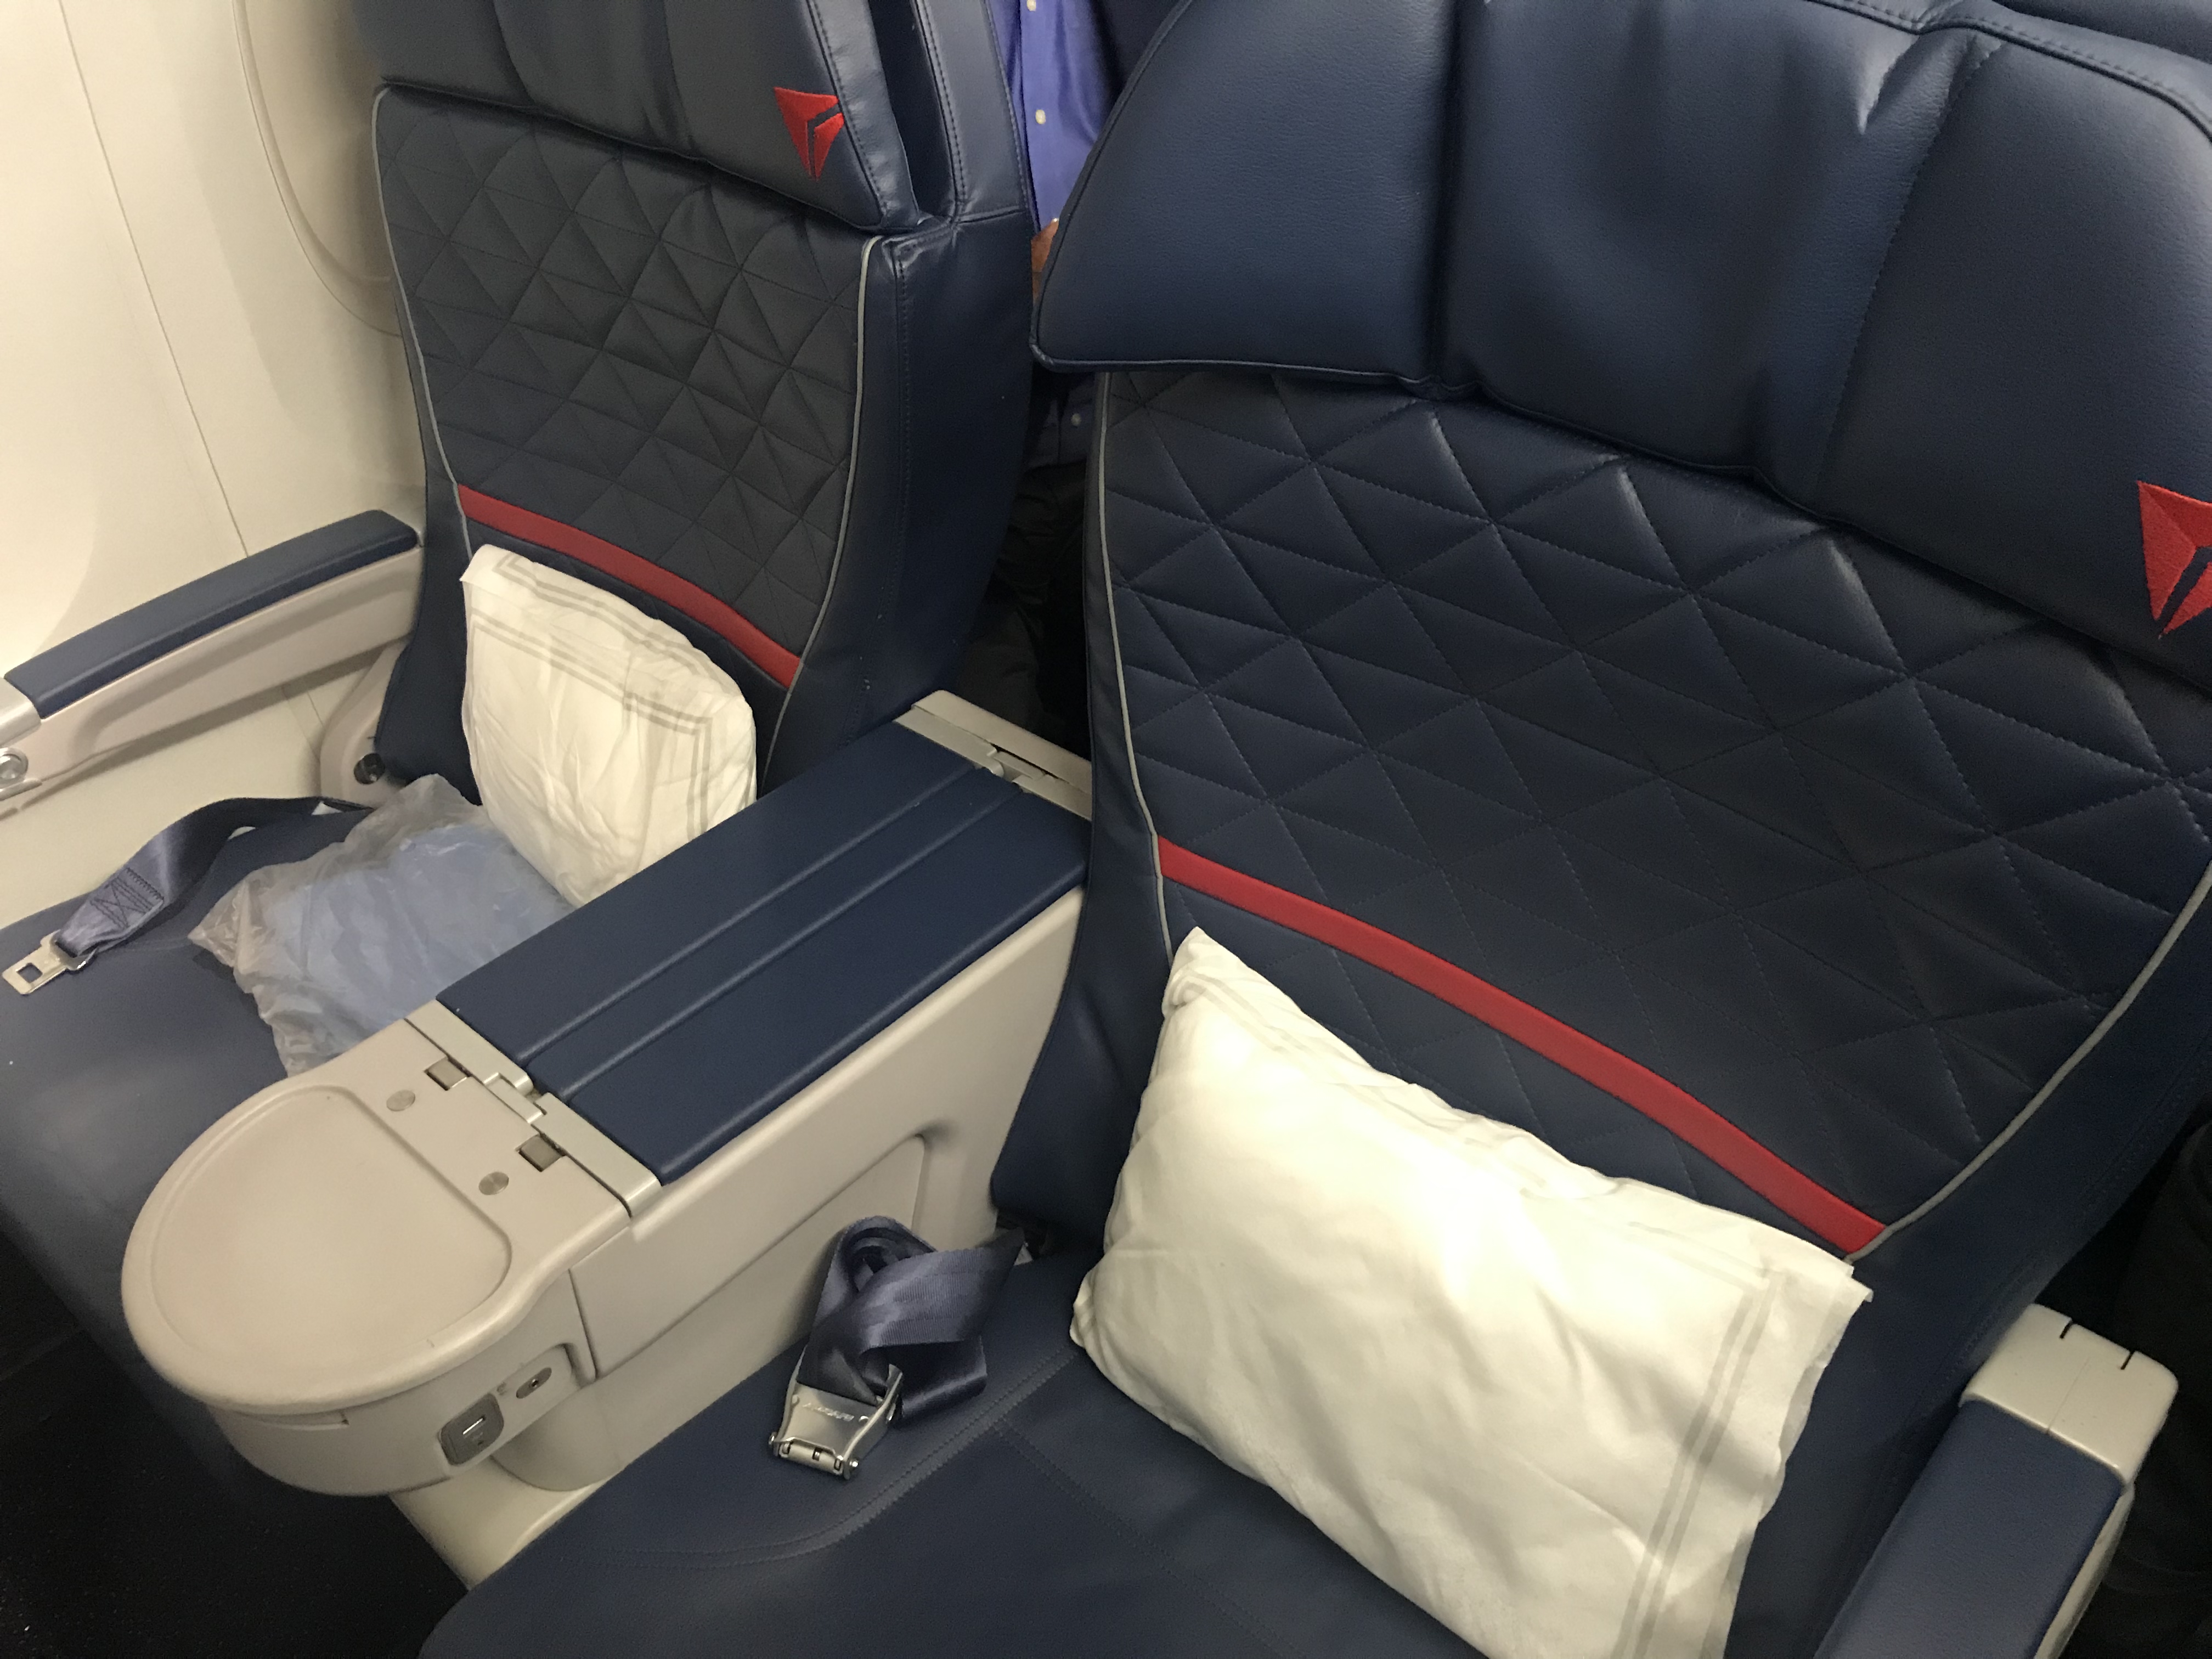 complimentary upgrades on award ticket - delta